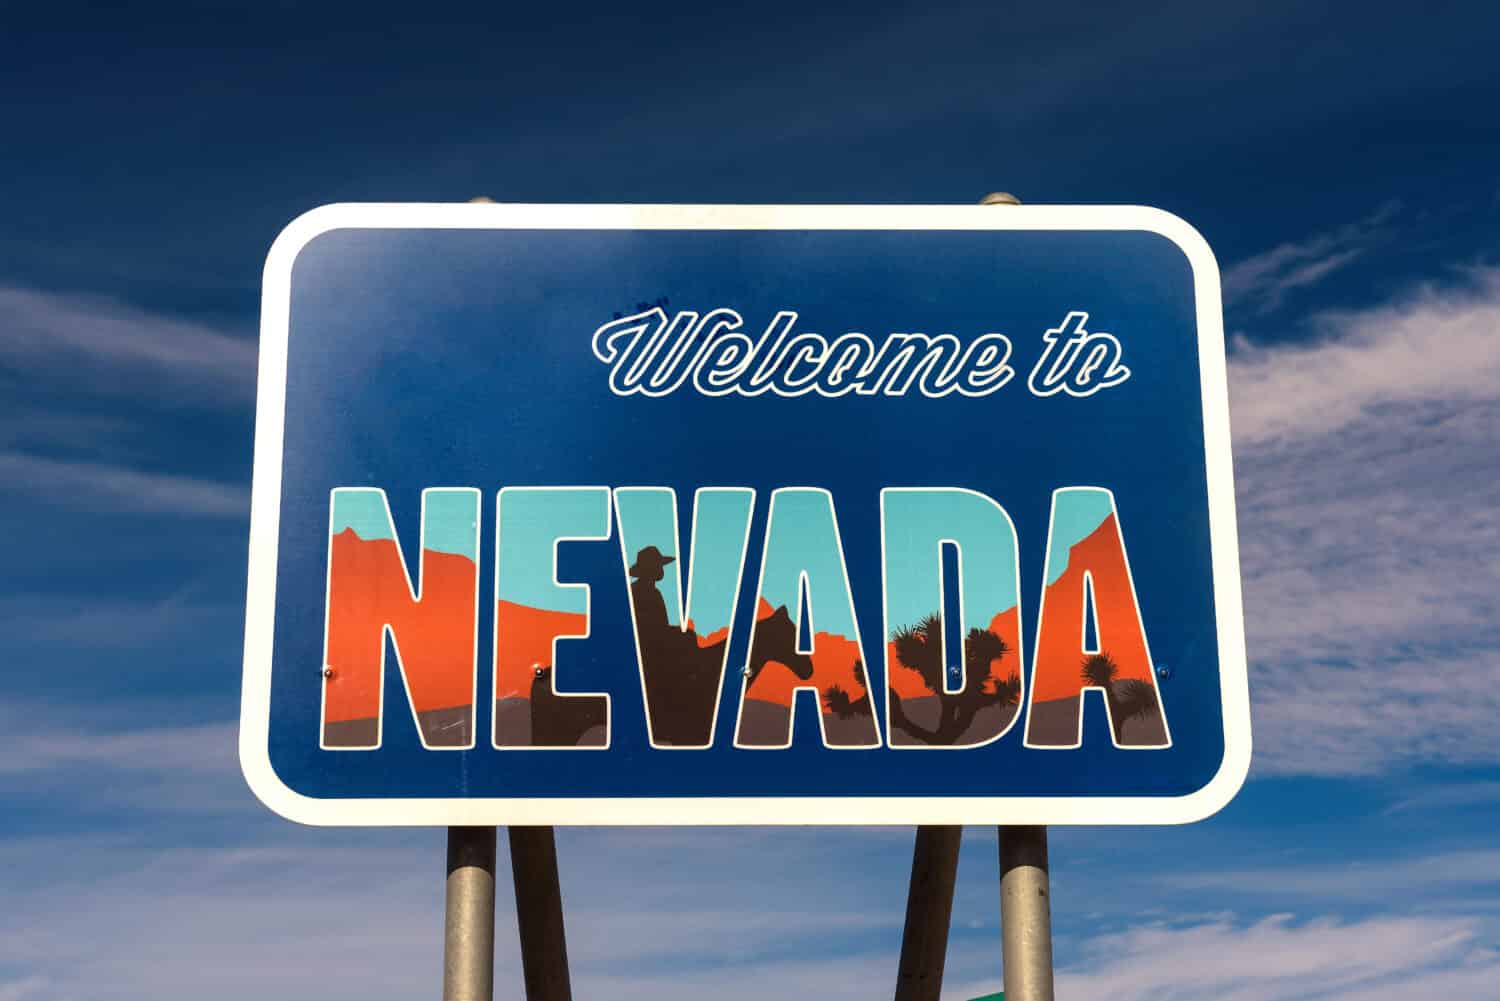 Welcome to Nevada road sign along State Route 373 near Death Valley